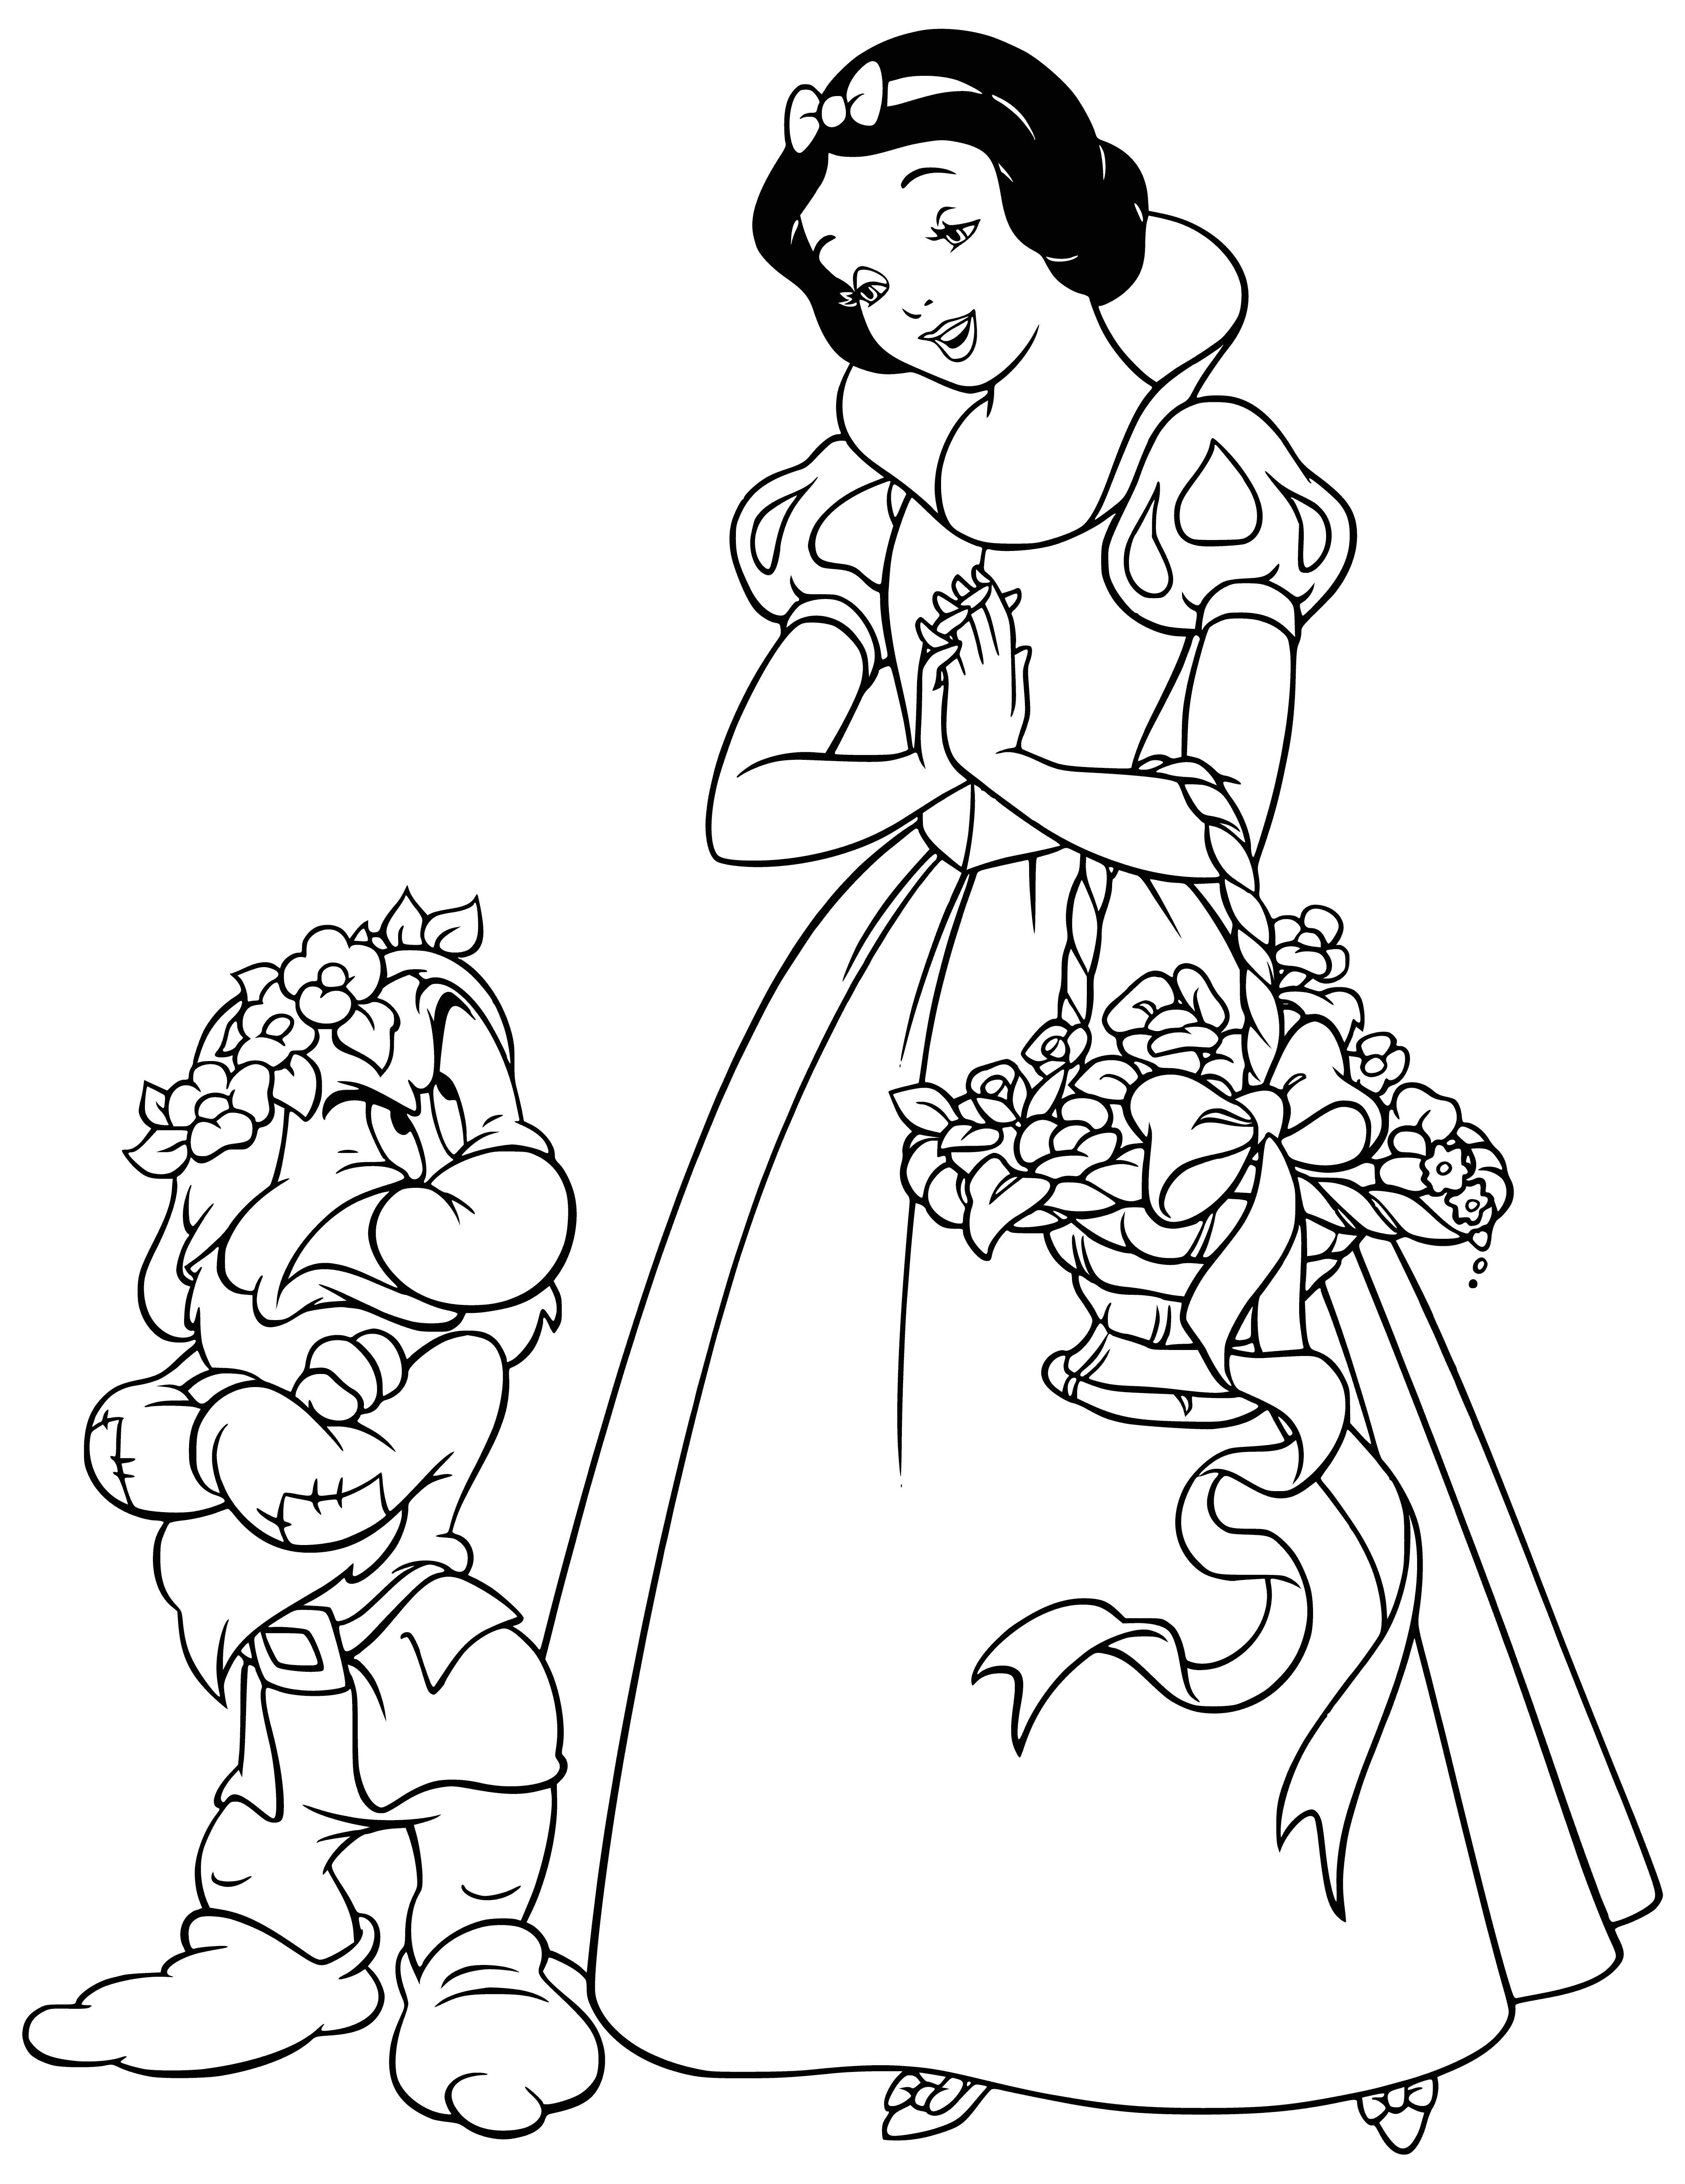 coloring page: Snow White and the gnome are depicted in a coloring page, looking unhappy as they engage in a conversation.